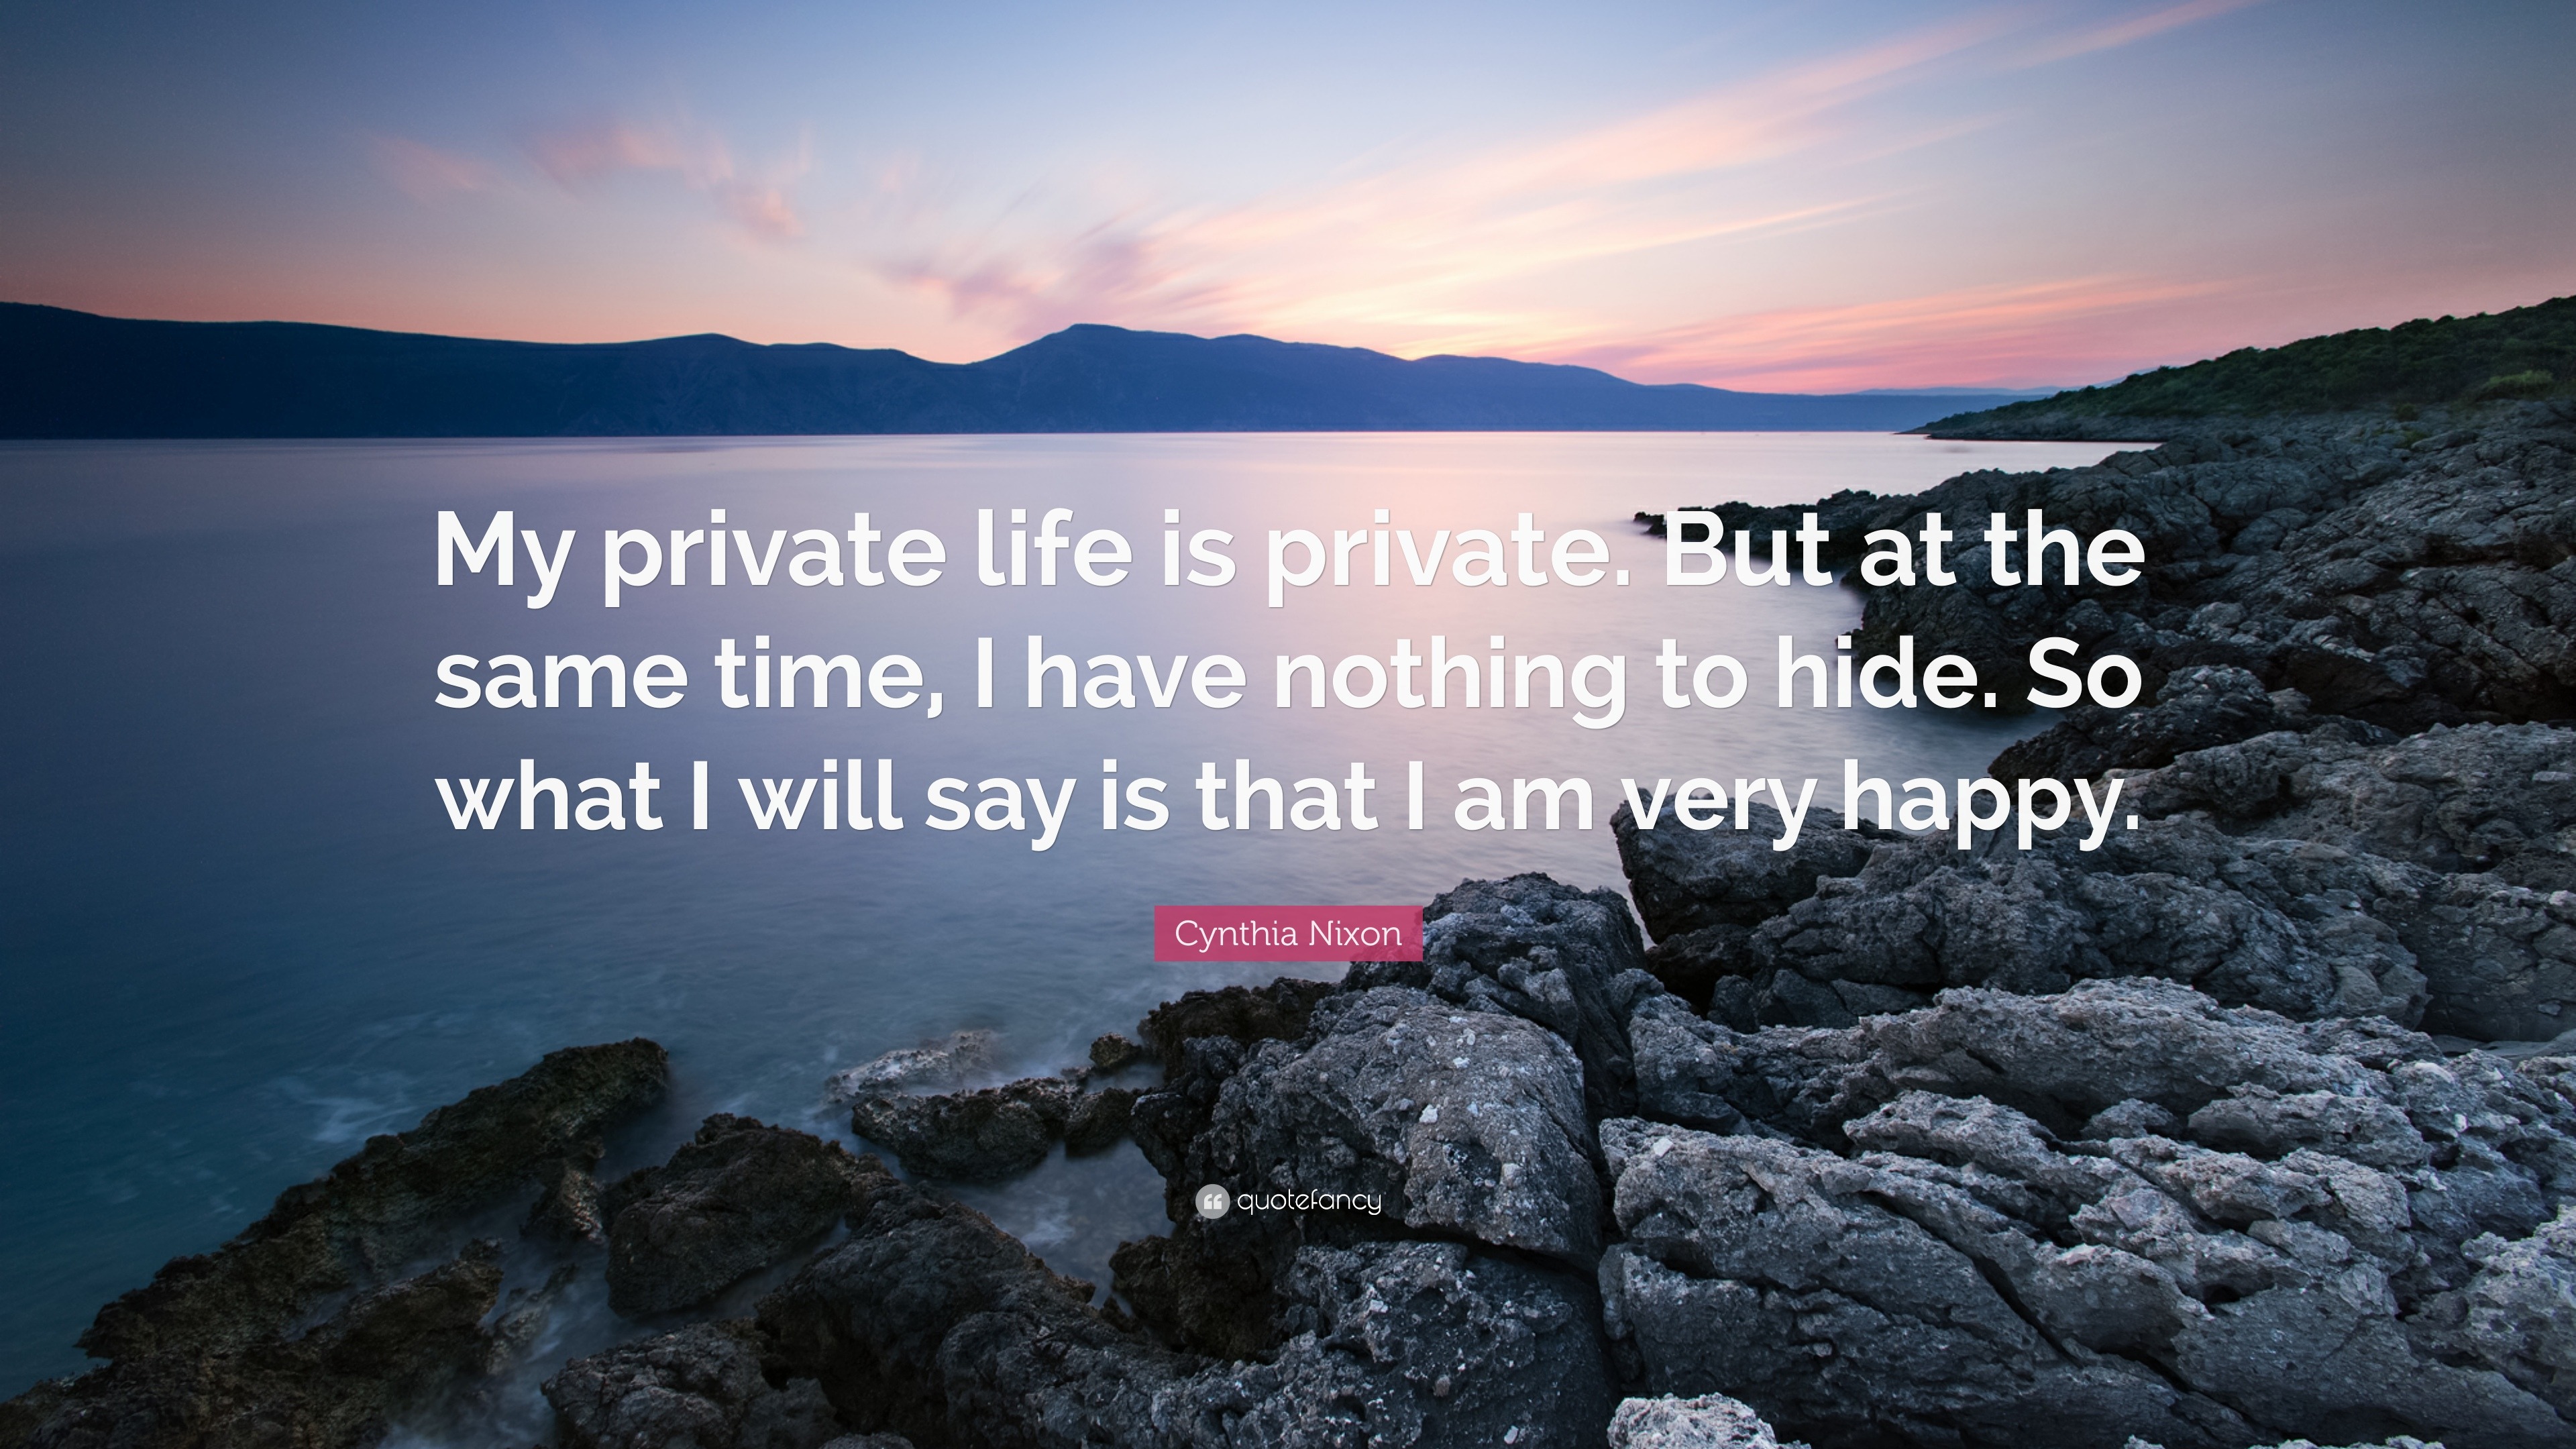 Cynthia Nixon Quote “My private life is private But at the same time